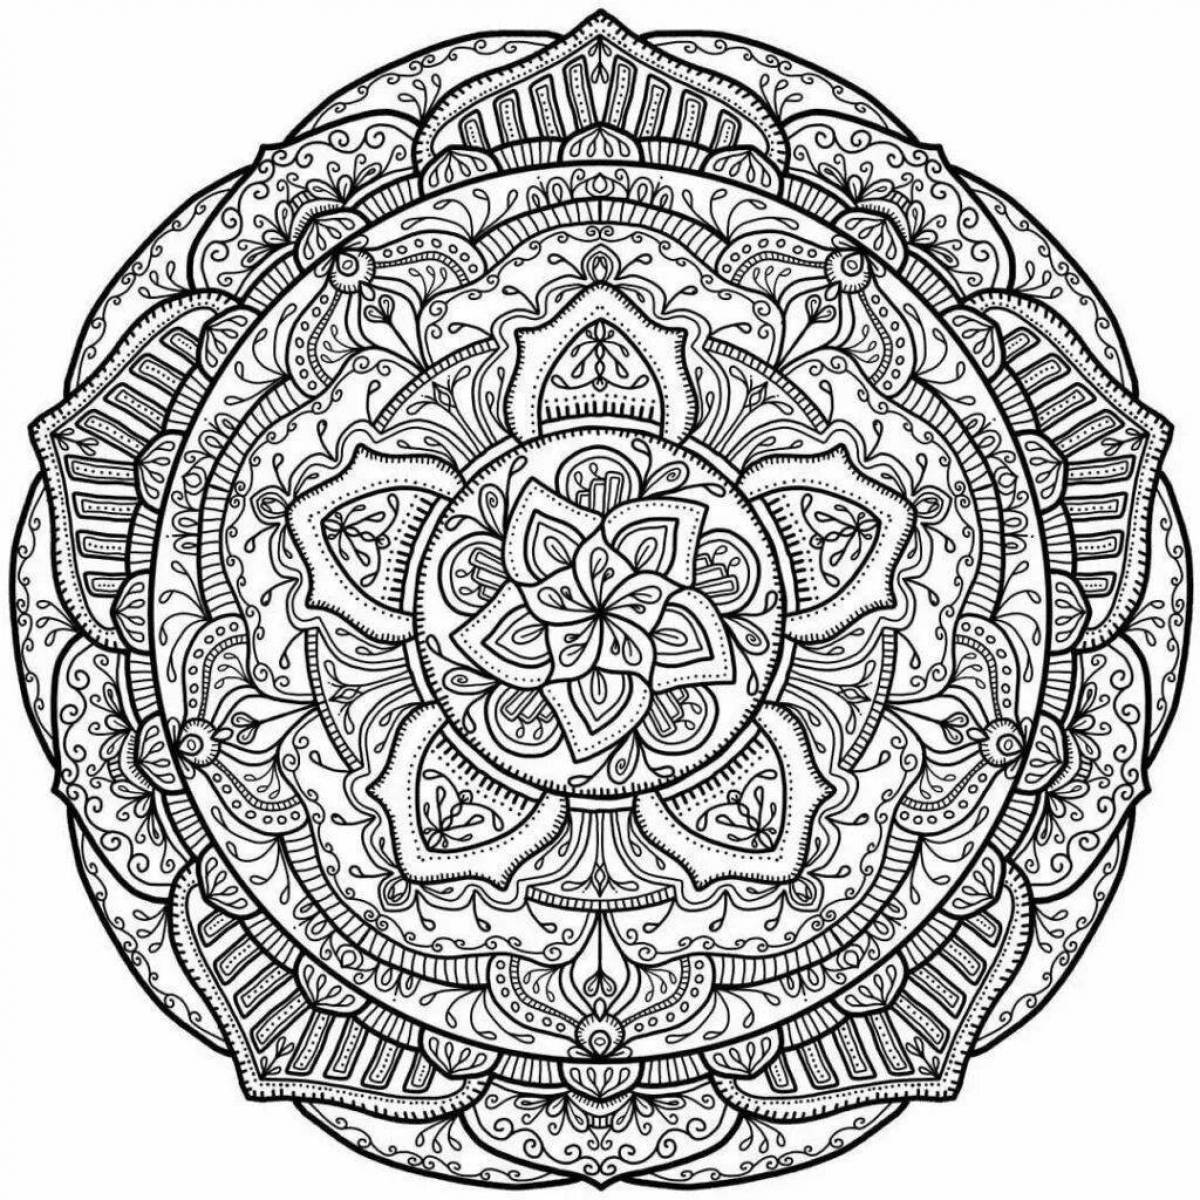 Inspirational coloring book meaning of the mandala